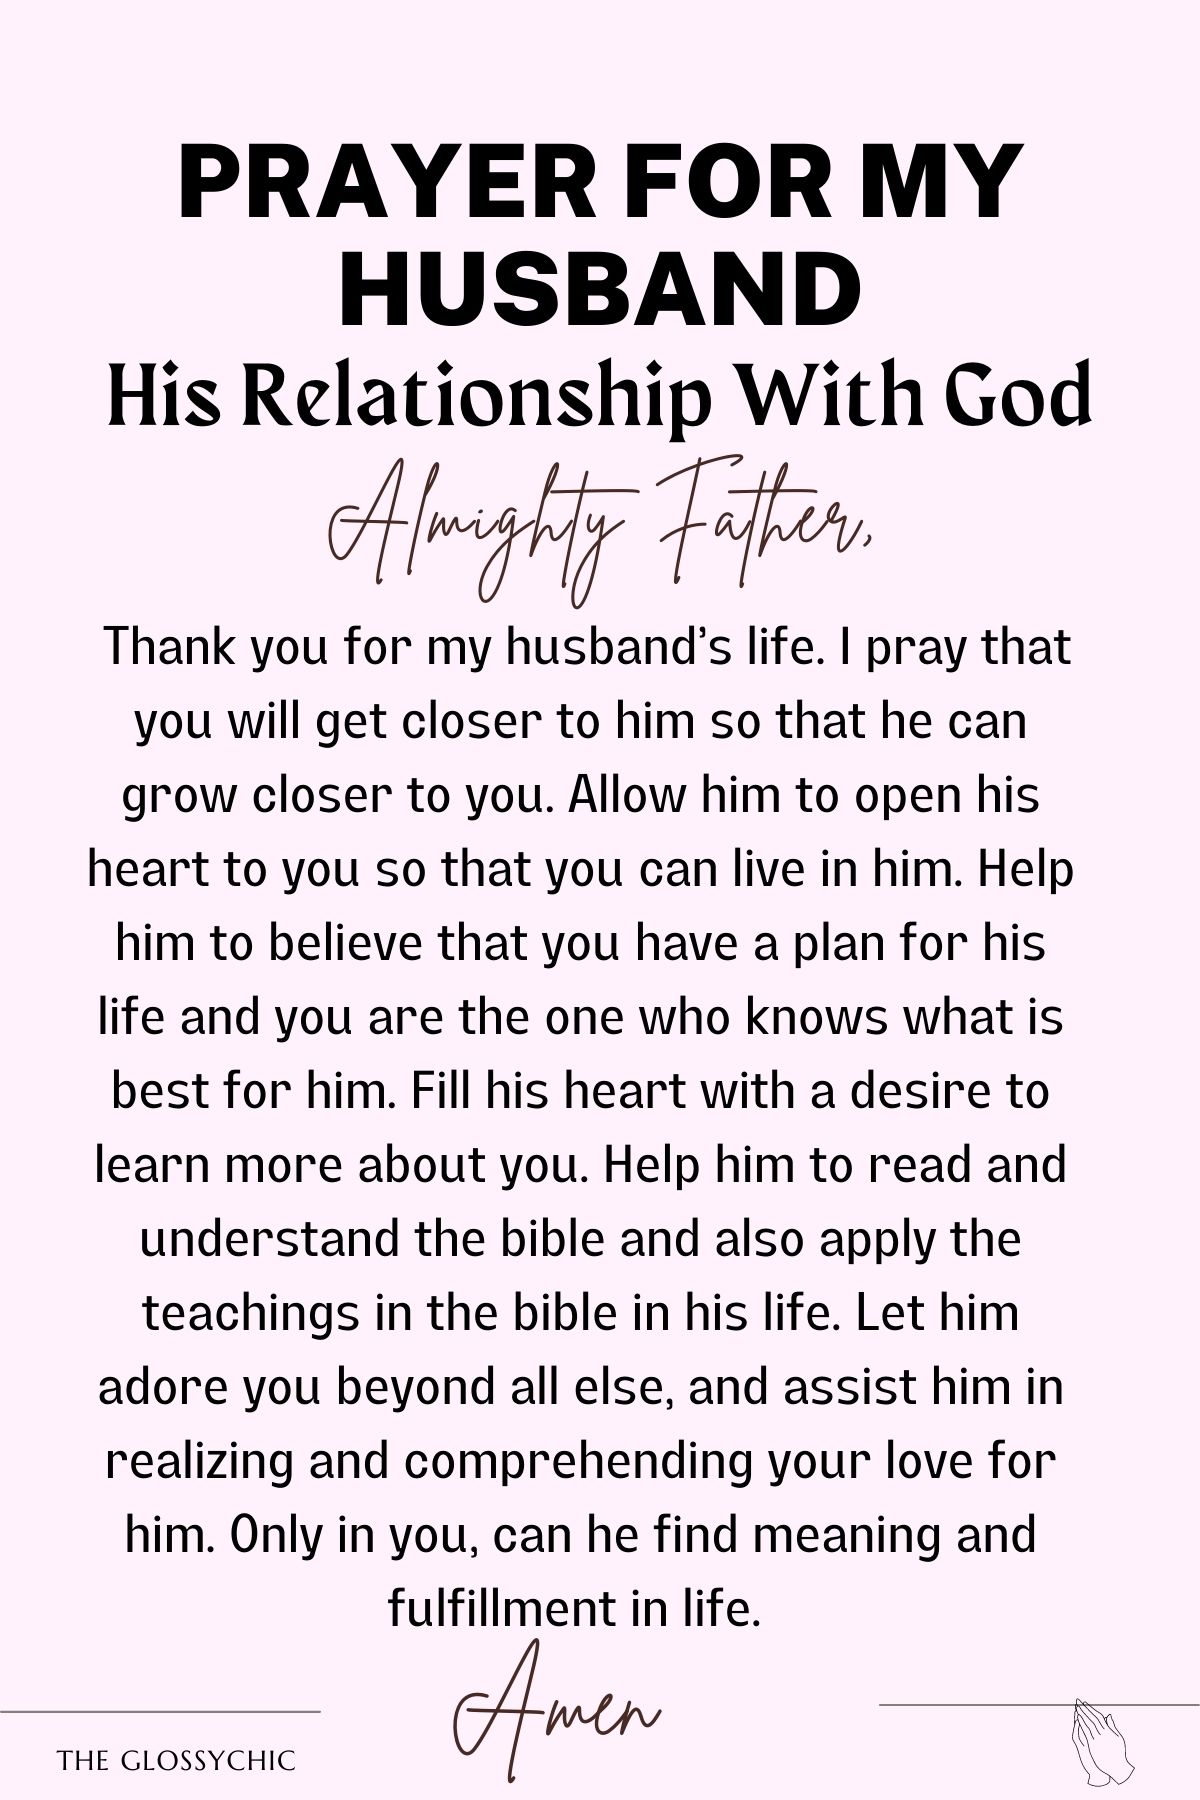 Prayer for my husband’s relationship with God